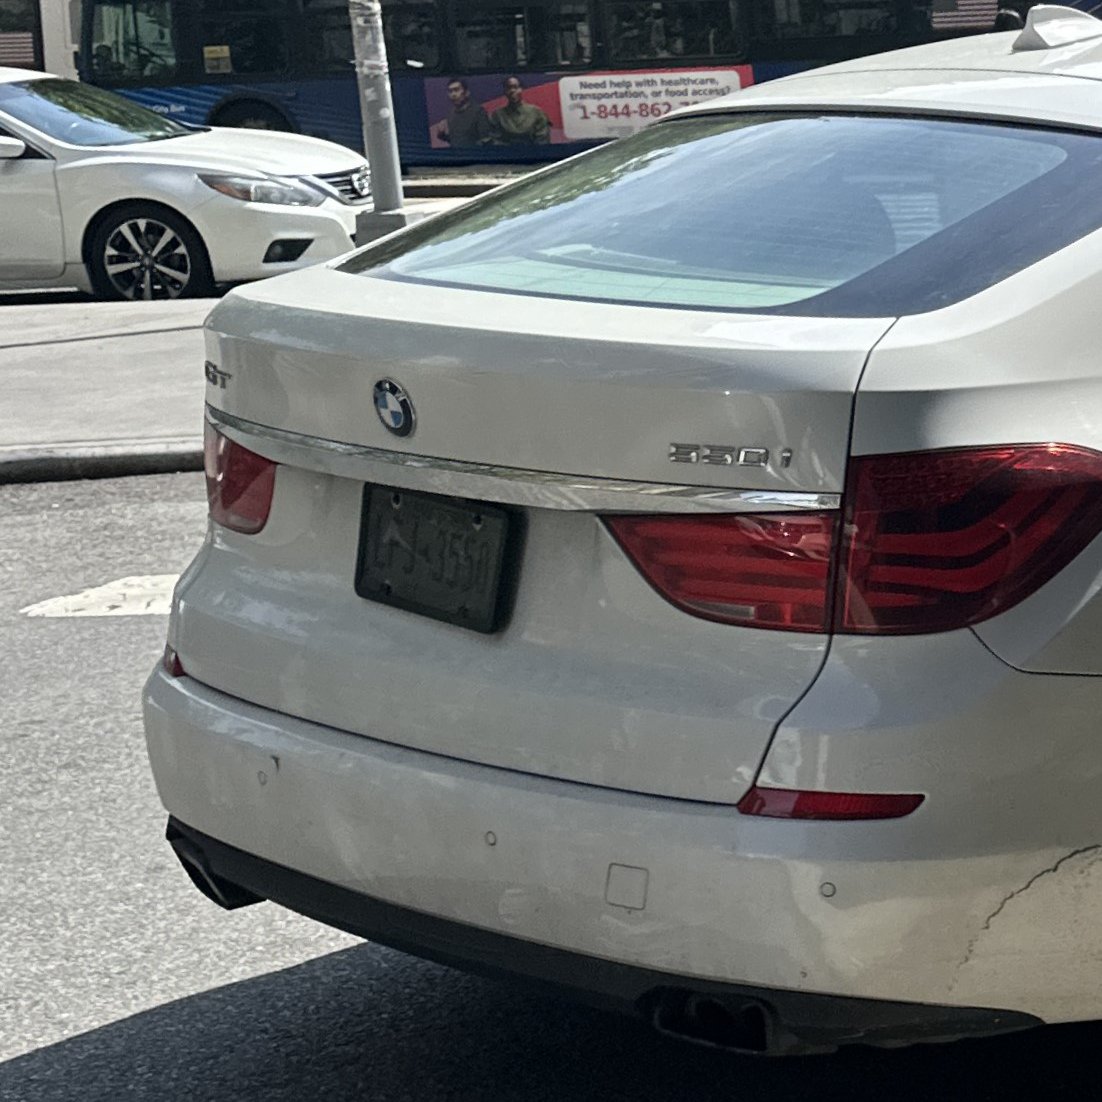 Why are @MTA employees driving around Brooklyn with illegal tinted plate covers?